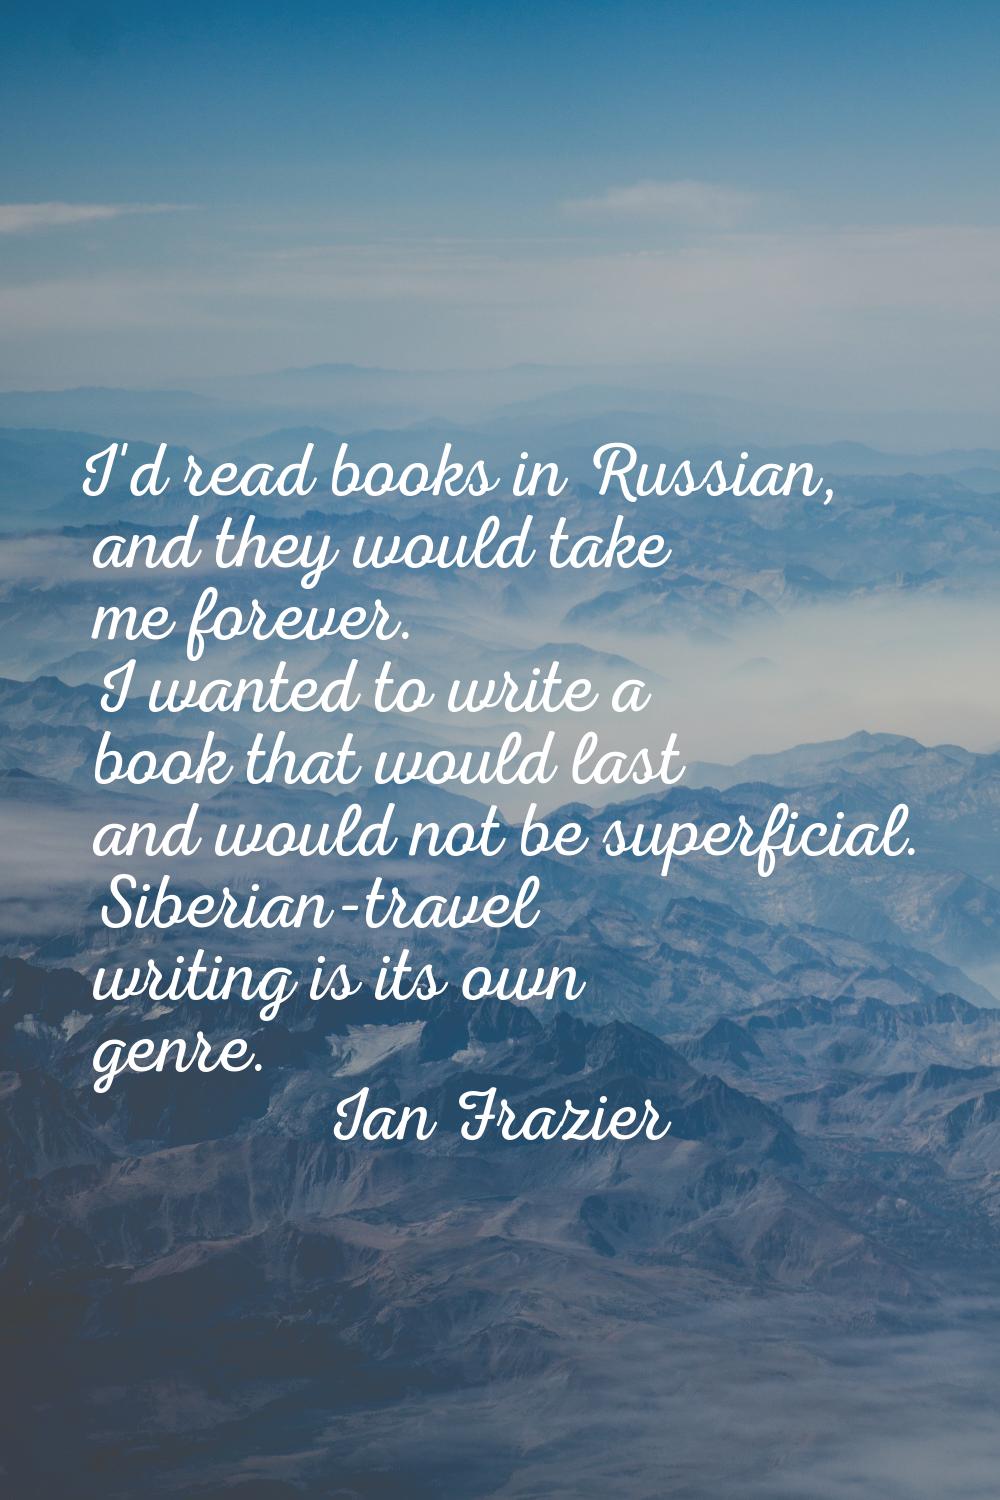 I'd read books in Russian, and they would take me forever. I wanted to write a book that would last